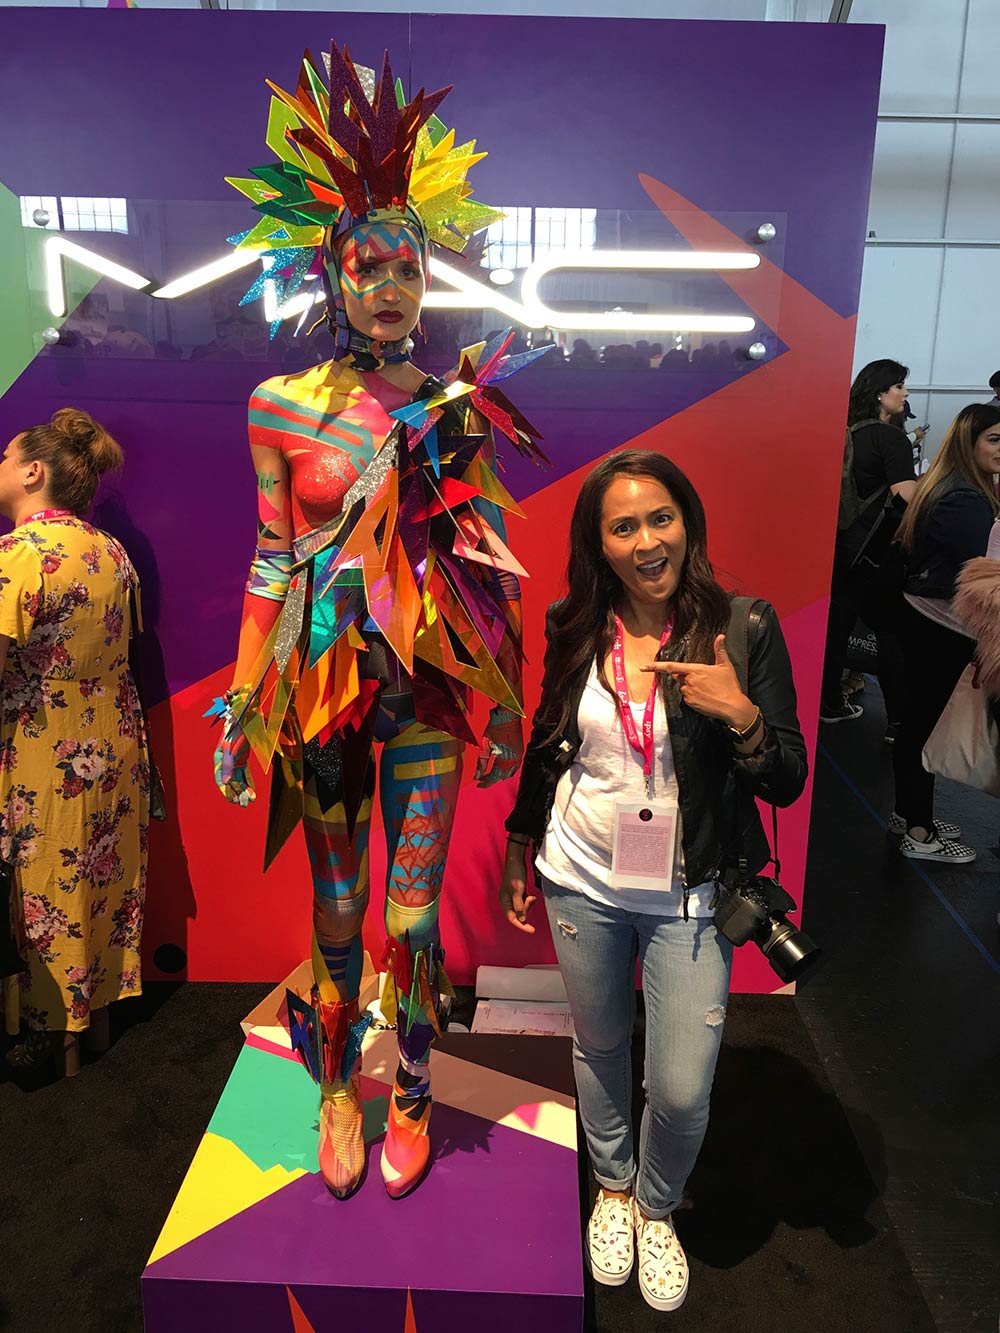 3 Ways to Make the Most of Your Next Beauty Convention Experience